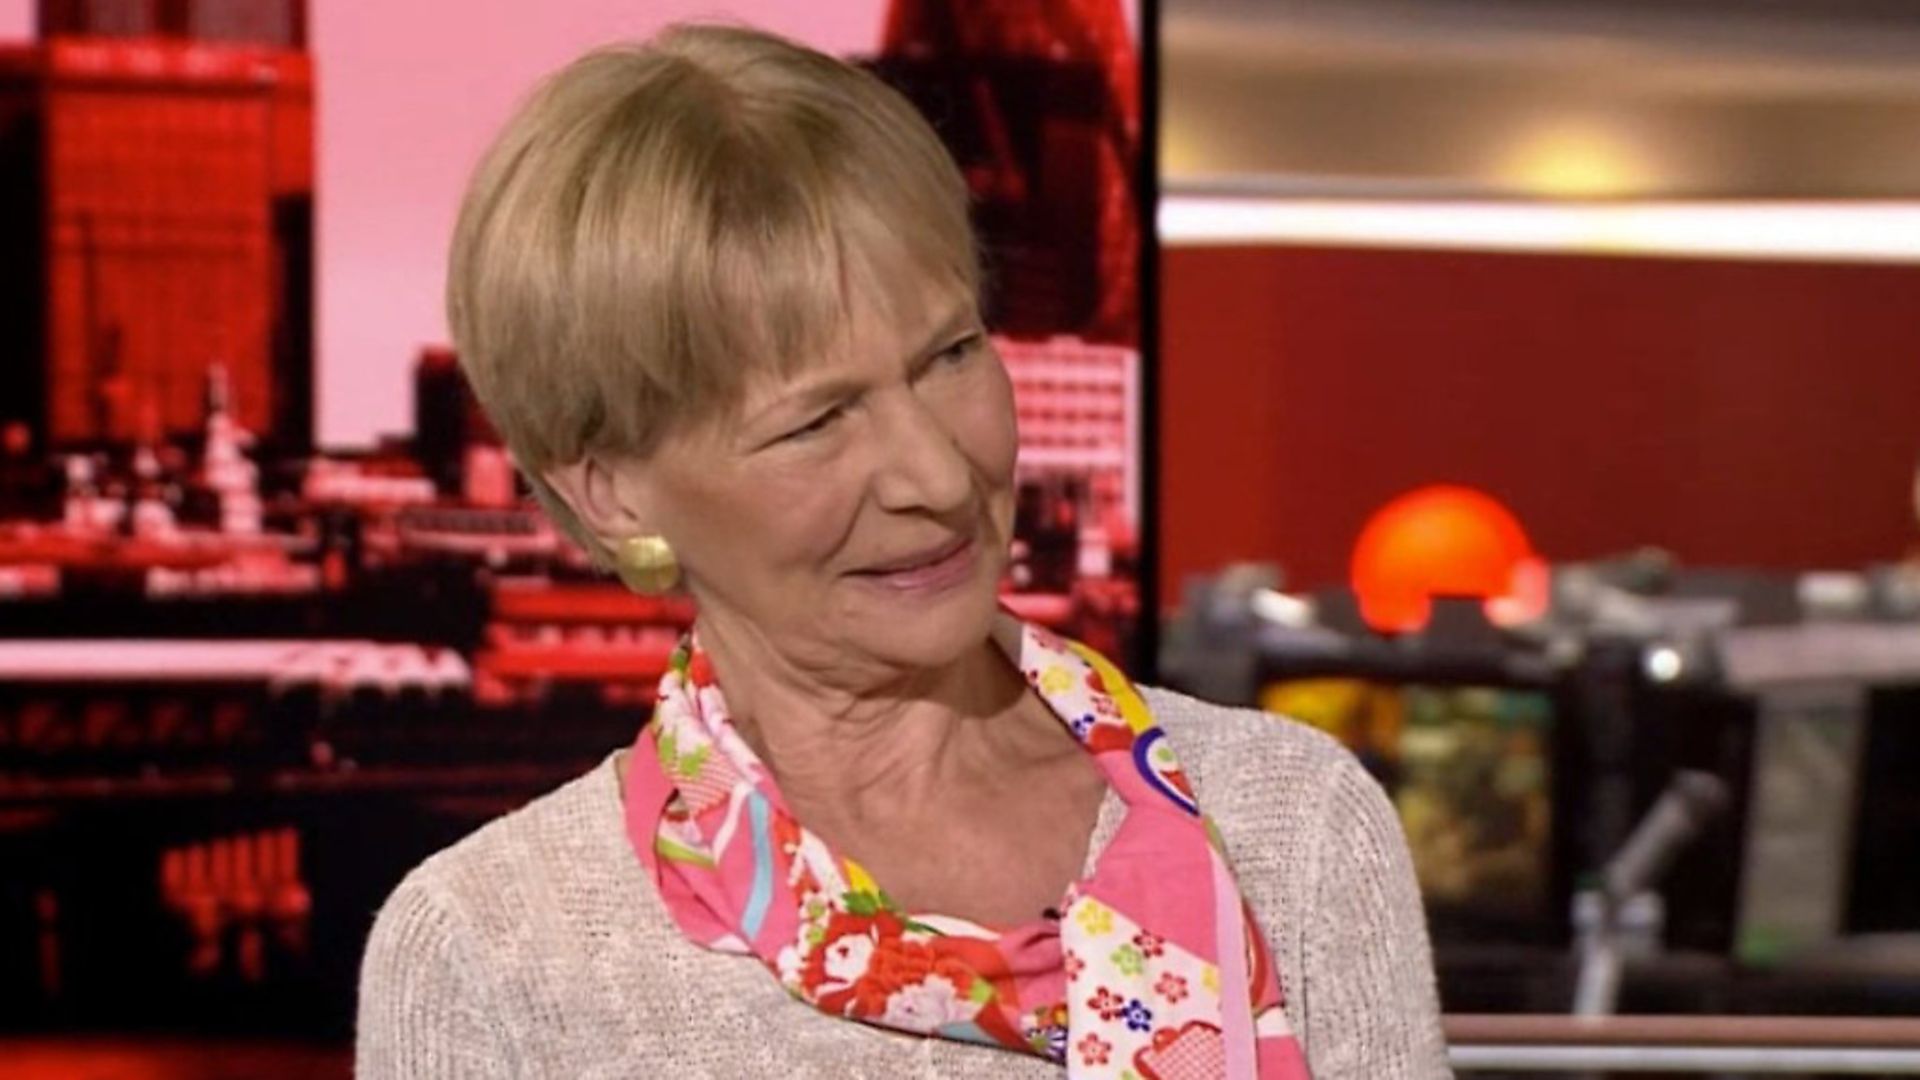 Isabel Hilton was told not to make any 'Remoaning speeches'. Photograph: BBC. - Credit: Archant